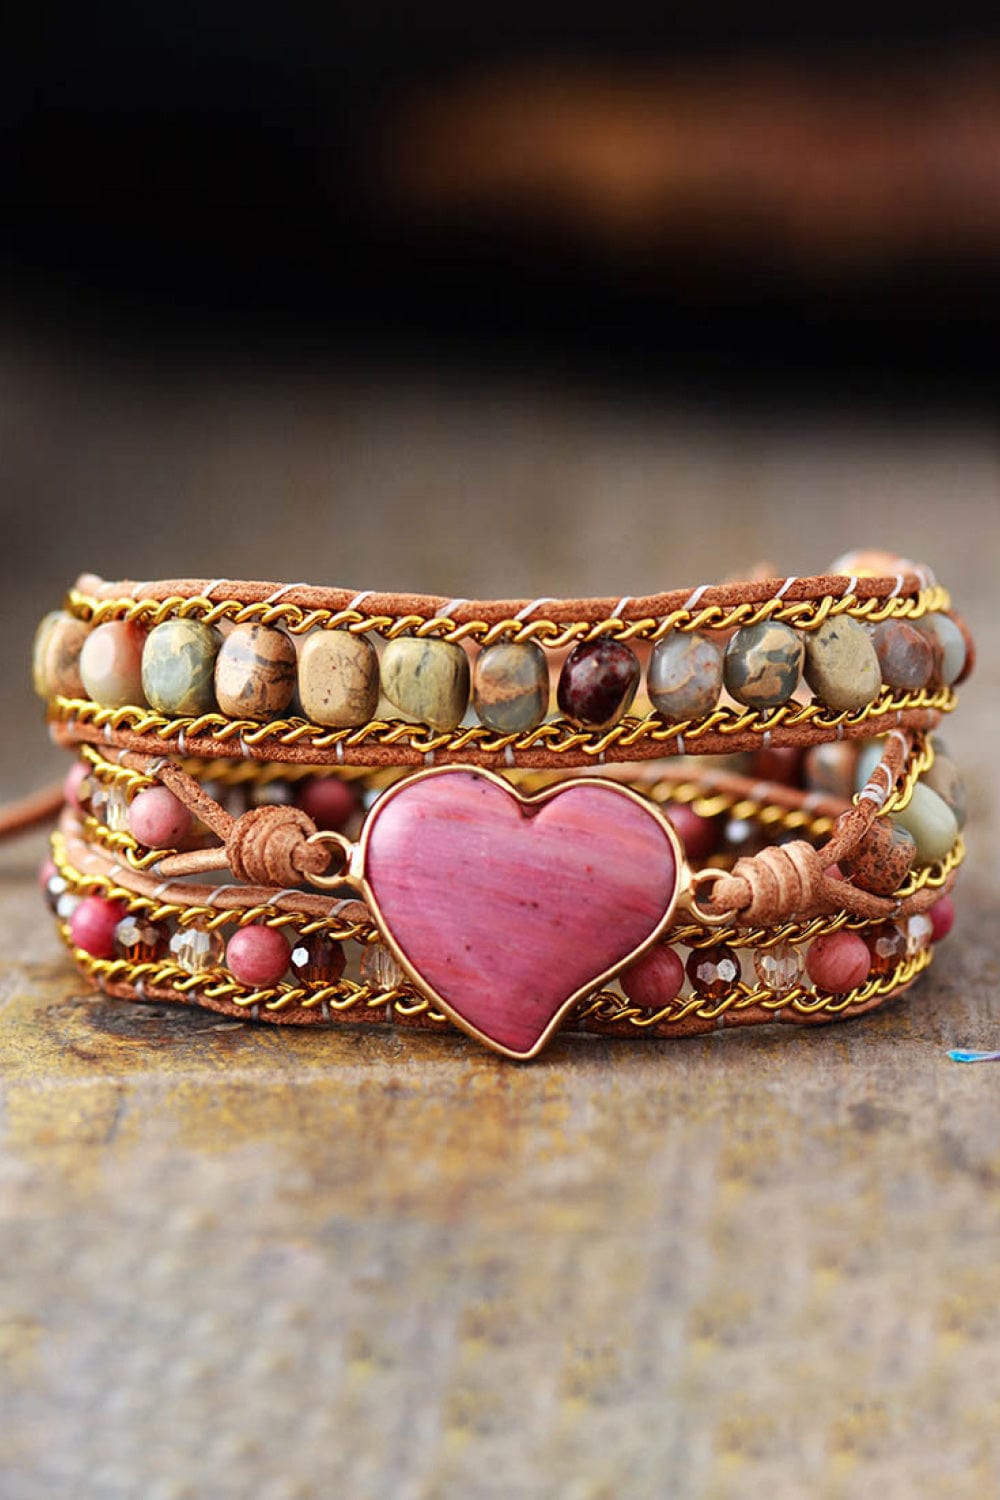 "Capture the essence of artisan craftsmanship with the Unique Kulture Handmade Heart Shape Triple Layer Beaded Bracelet. This exquisite bracelet features three layers of meticulously crafted beads in a heartfelt arrangement, forming a stunning heart shape at its center. The handcrafted design showcases a harmonious blend of colors and textures, adding a touch of elegance to any ensemble. Elevate your style with this one-of-a-kind accessory that celebrates creativity and individuality."